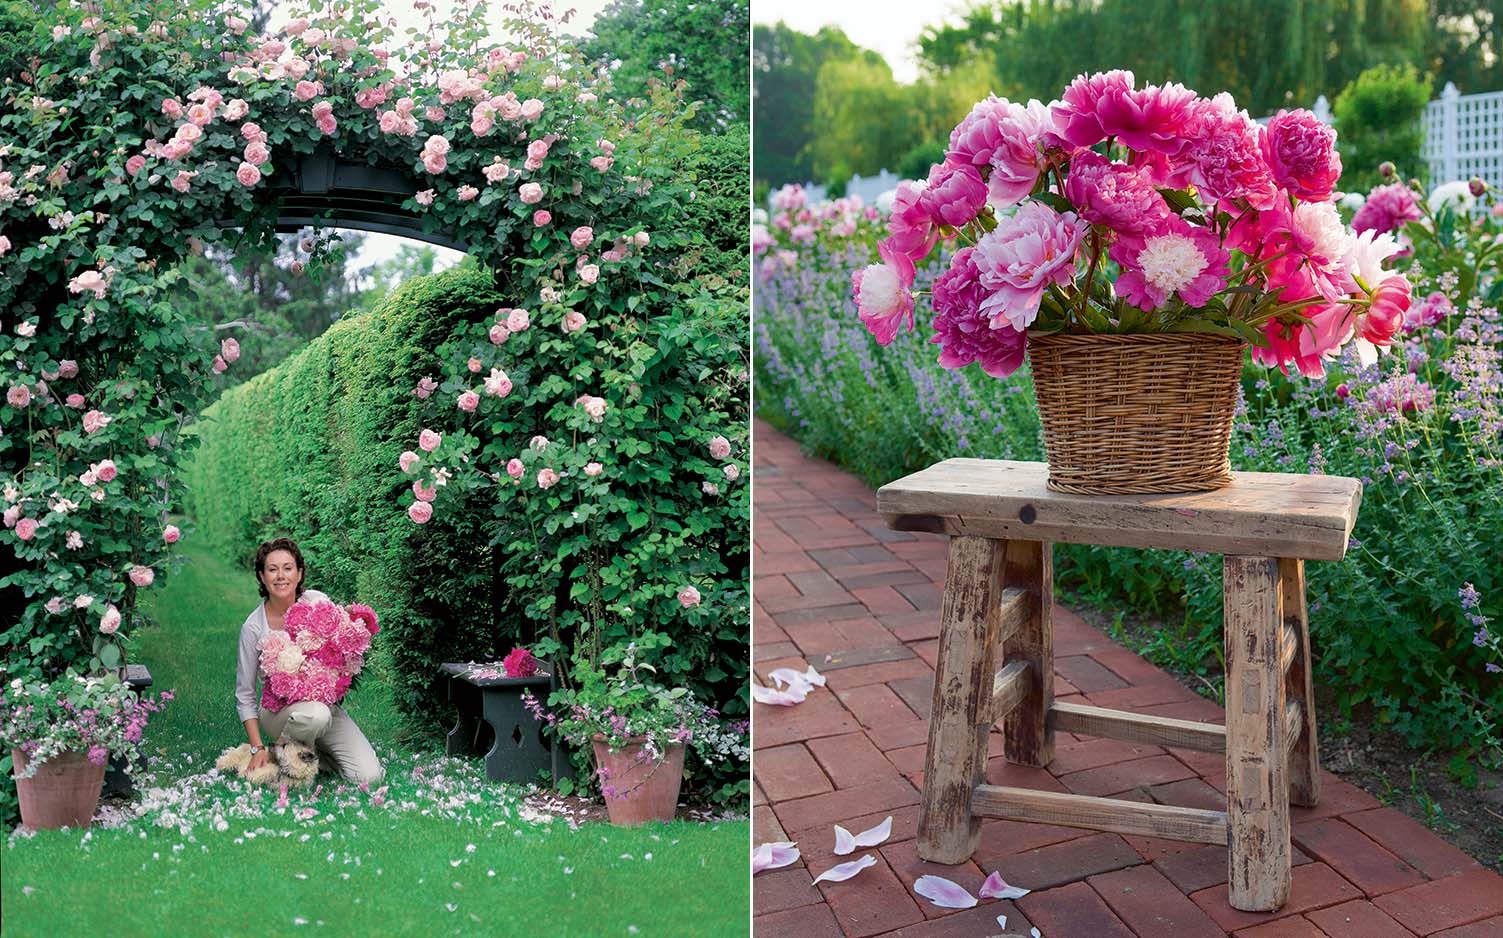 A picture of Carolyne Roehm At Home in the Garden Photography by Carolyne Roehm